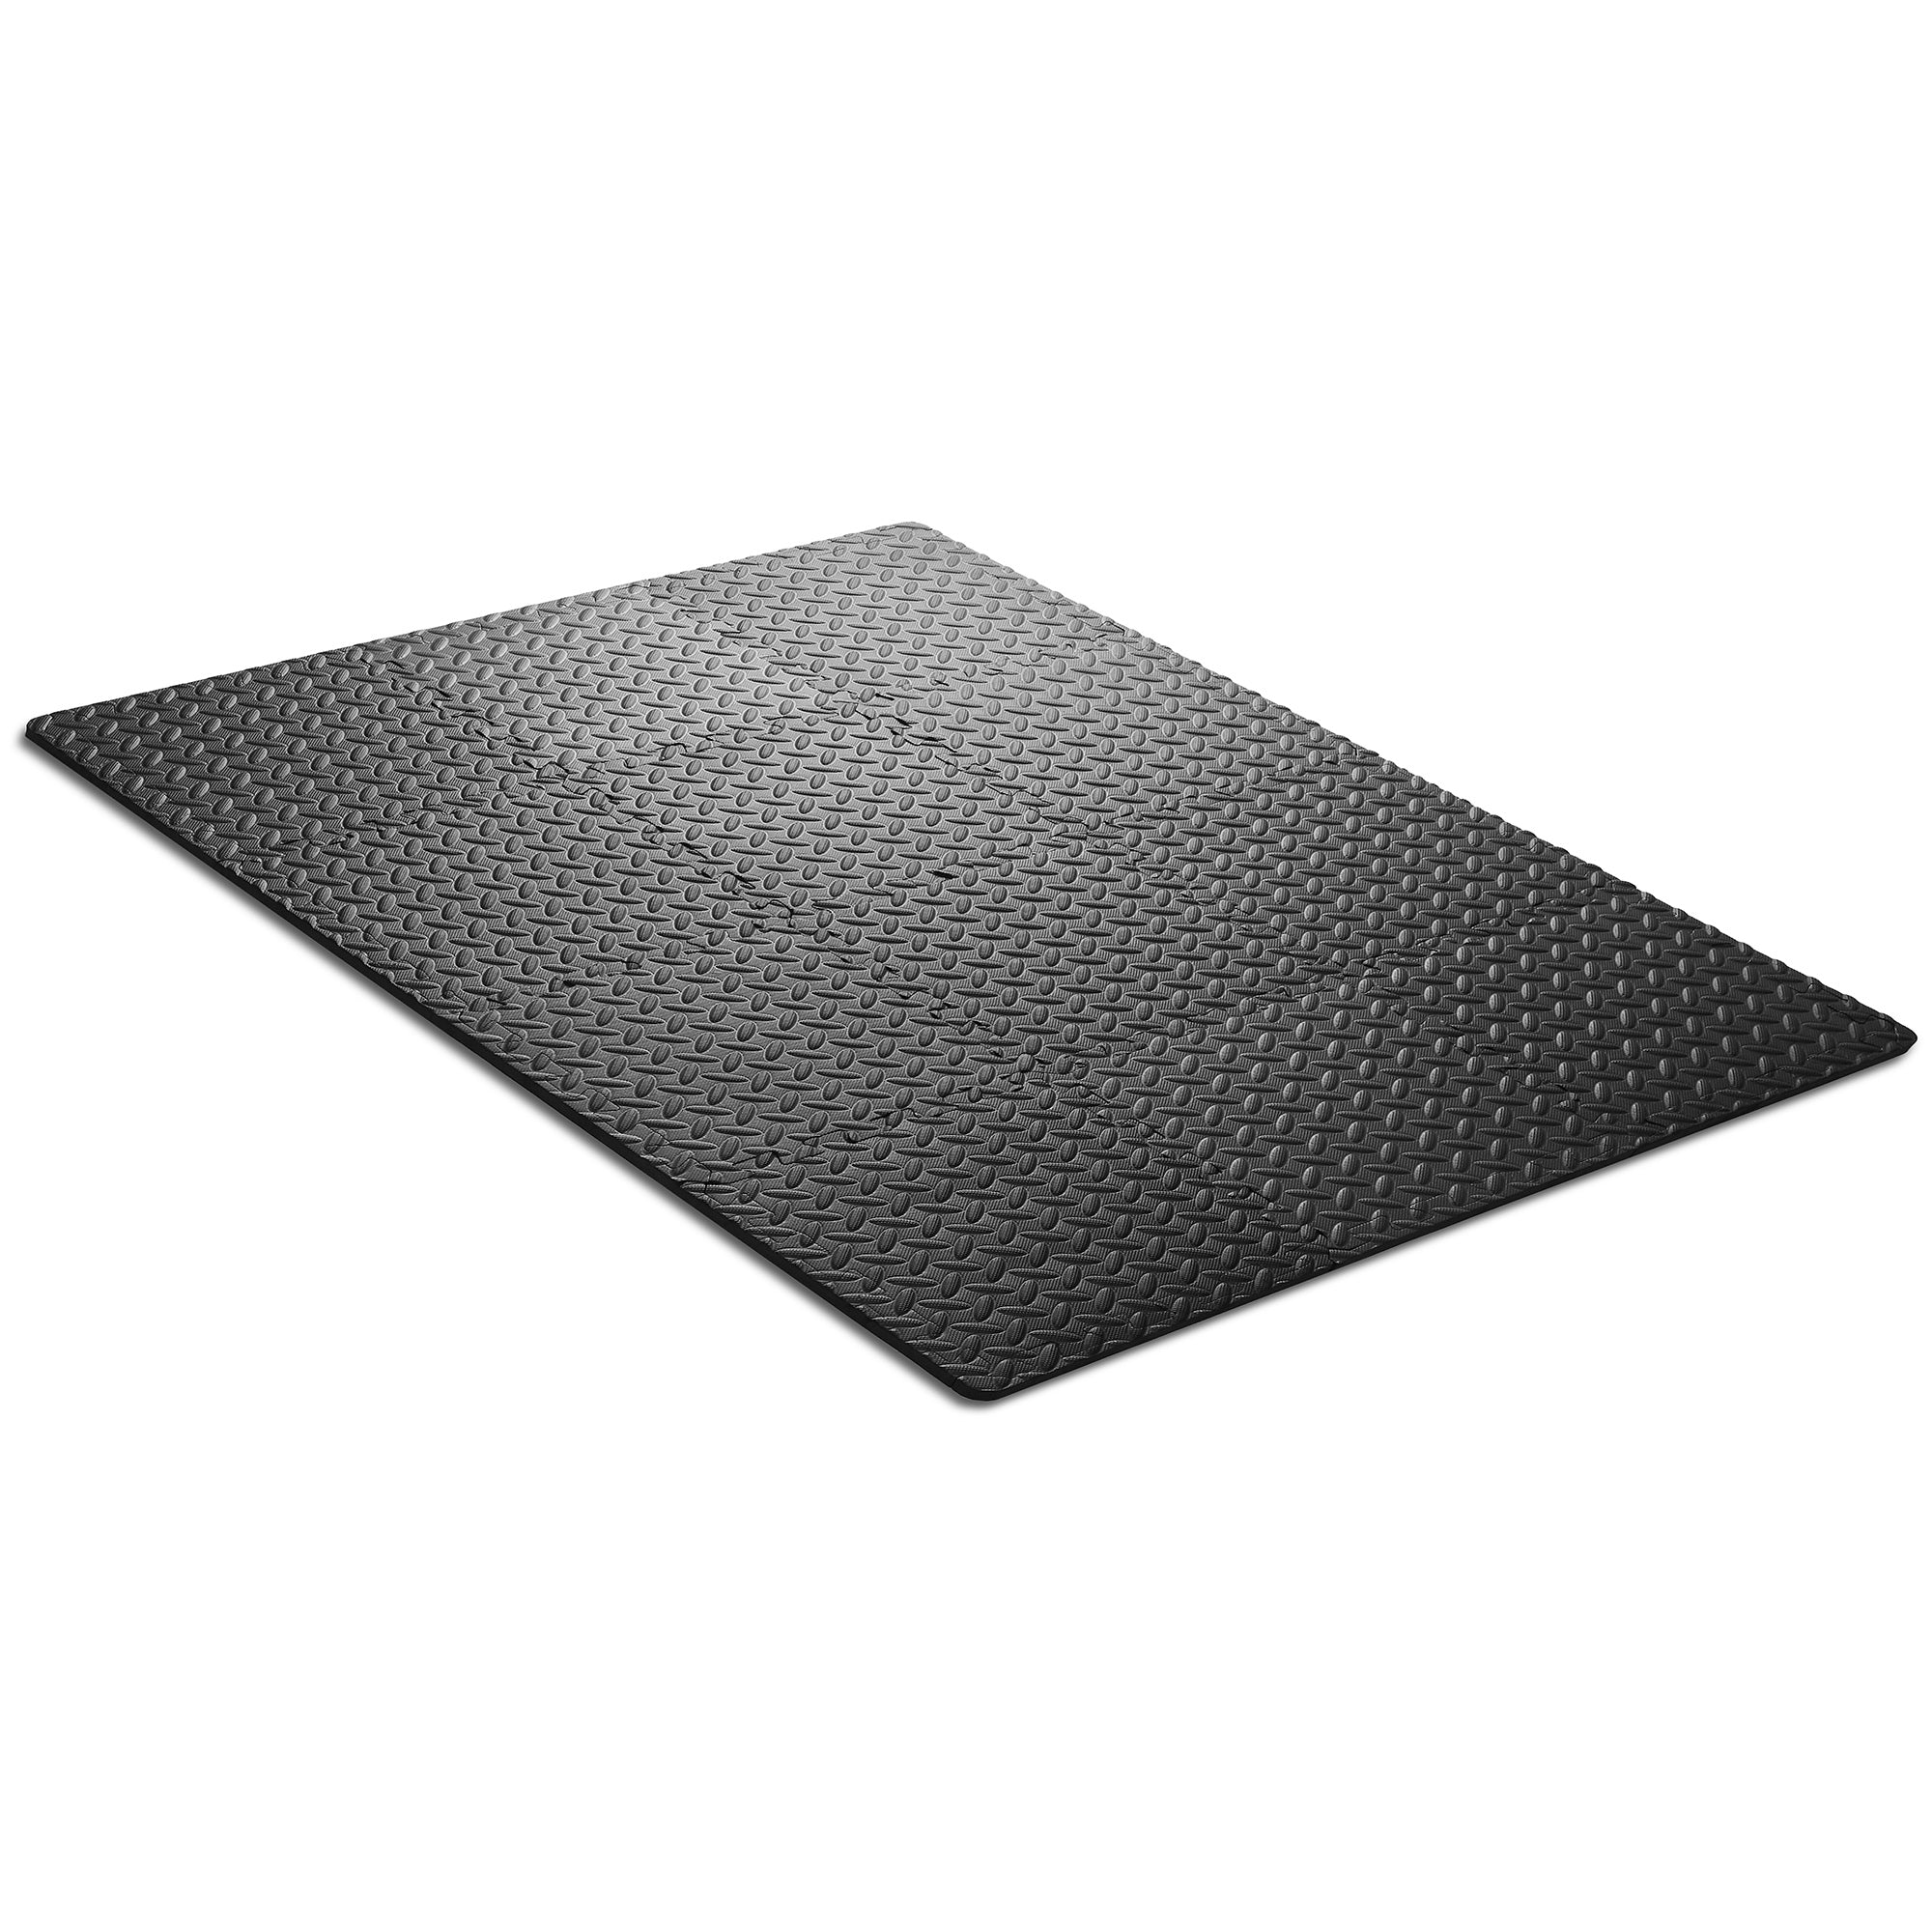 Philosophy Gym Exercise Equipment Mat 36 X 84-inch, 6mm Thick High